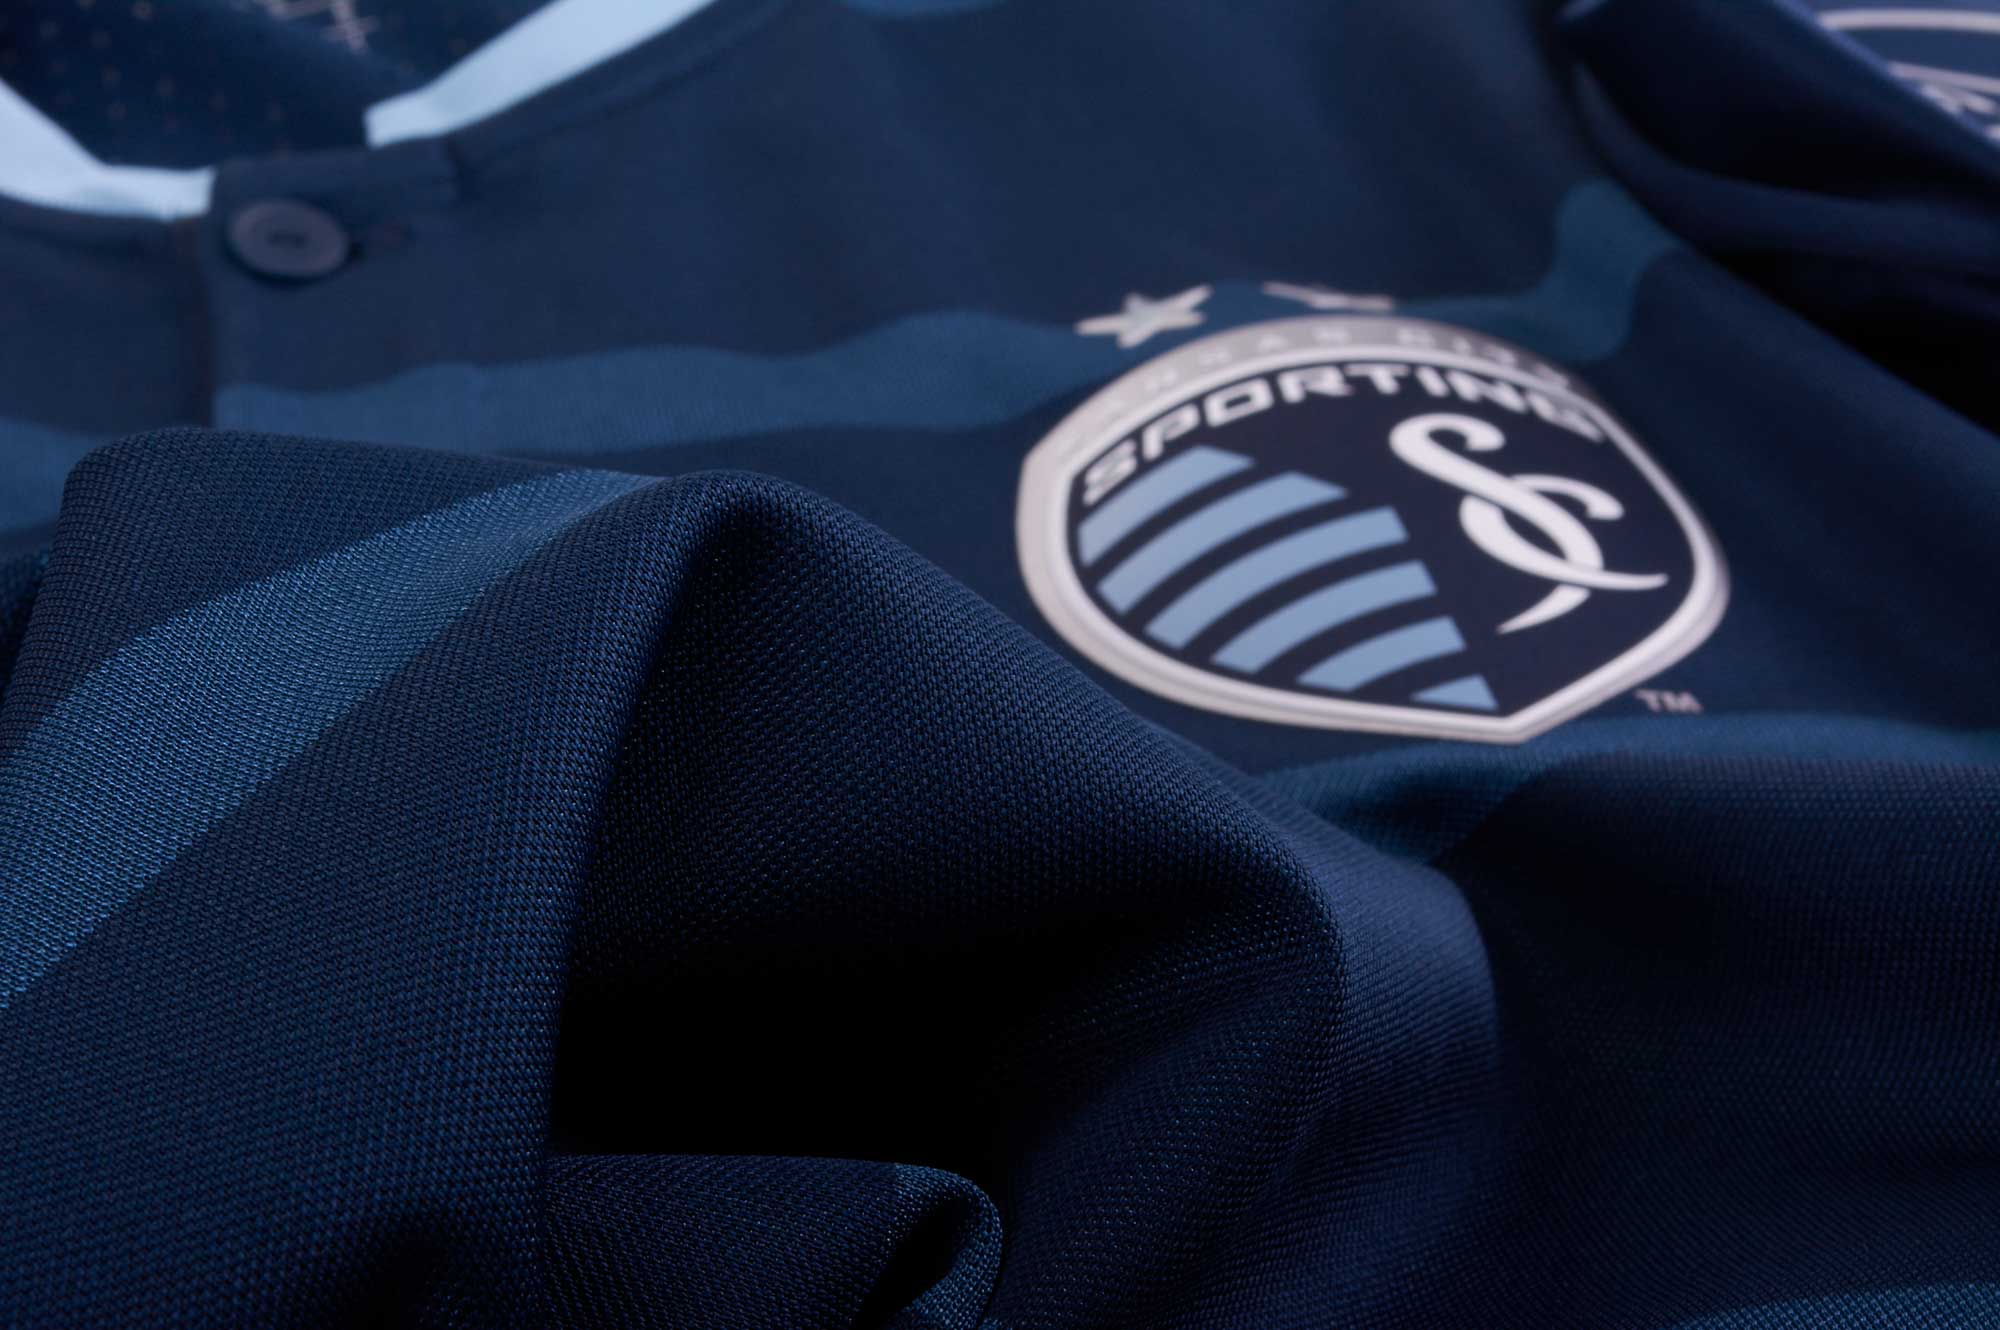 Sporting Kansas City 2022 Authentic Away Jersey by Adidas - Size XL